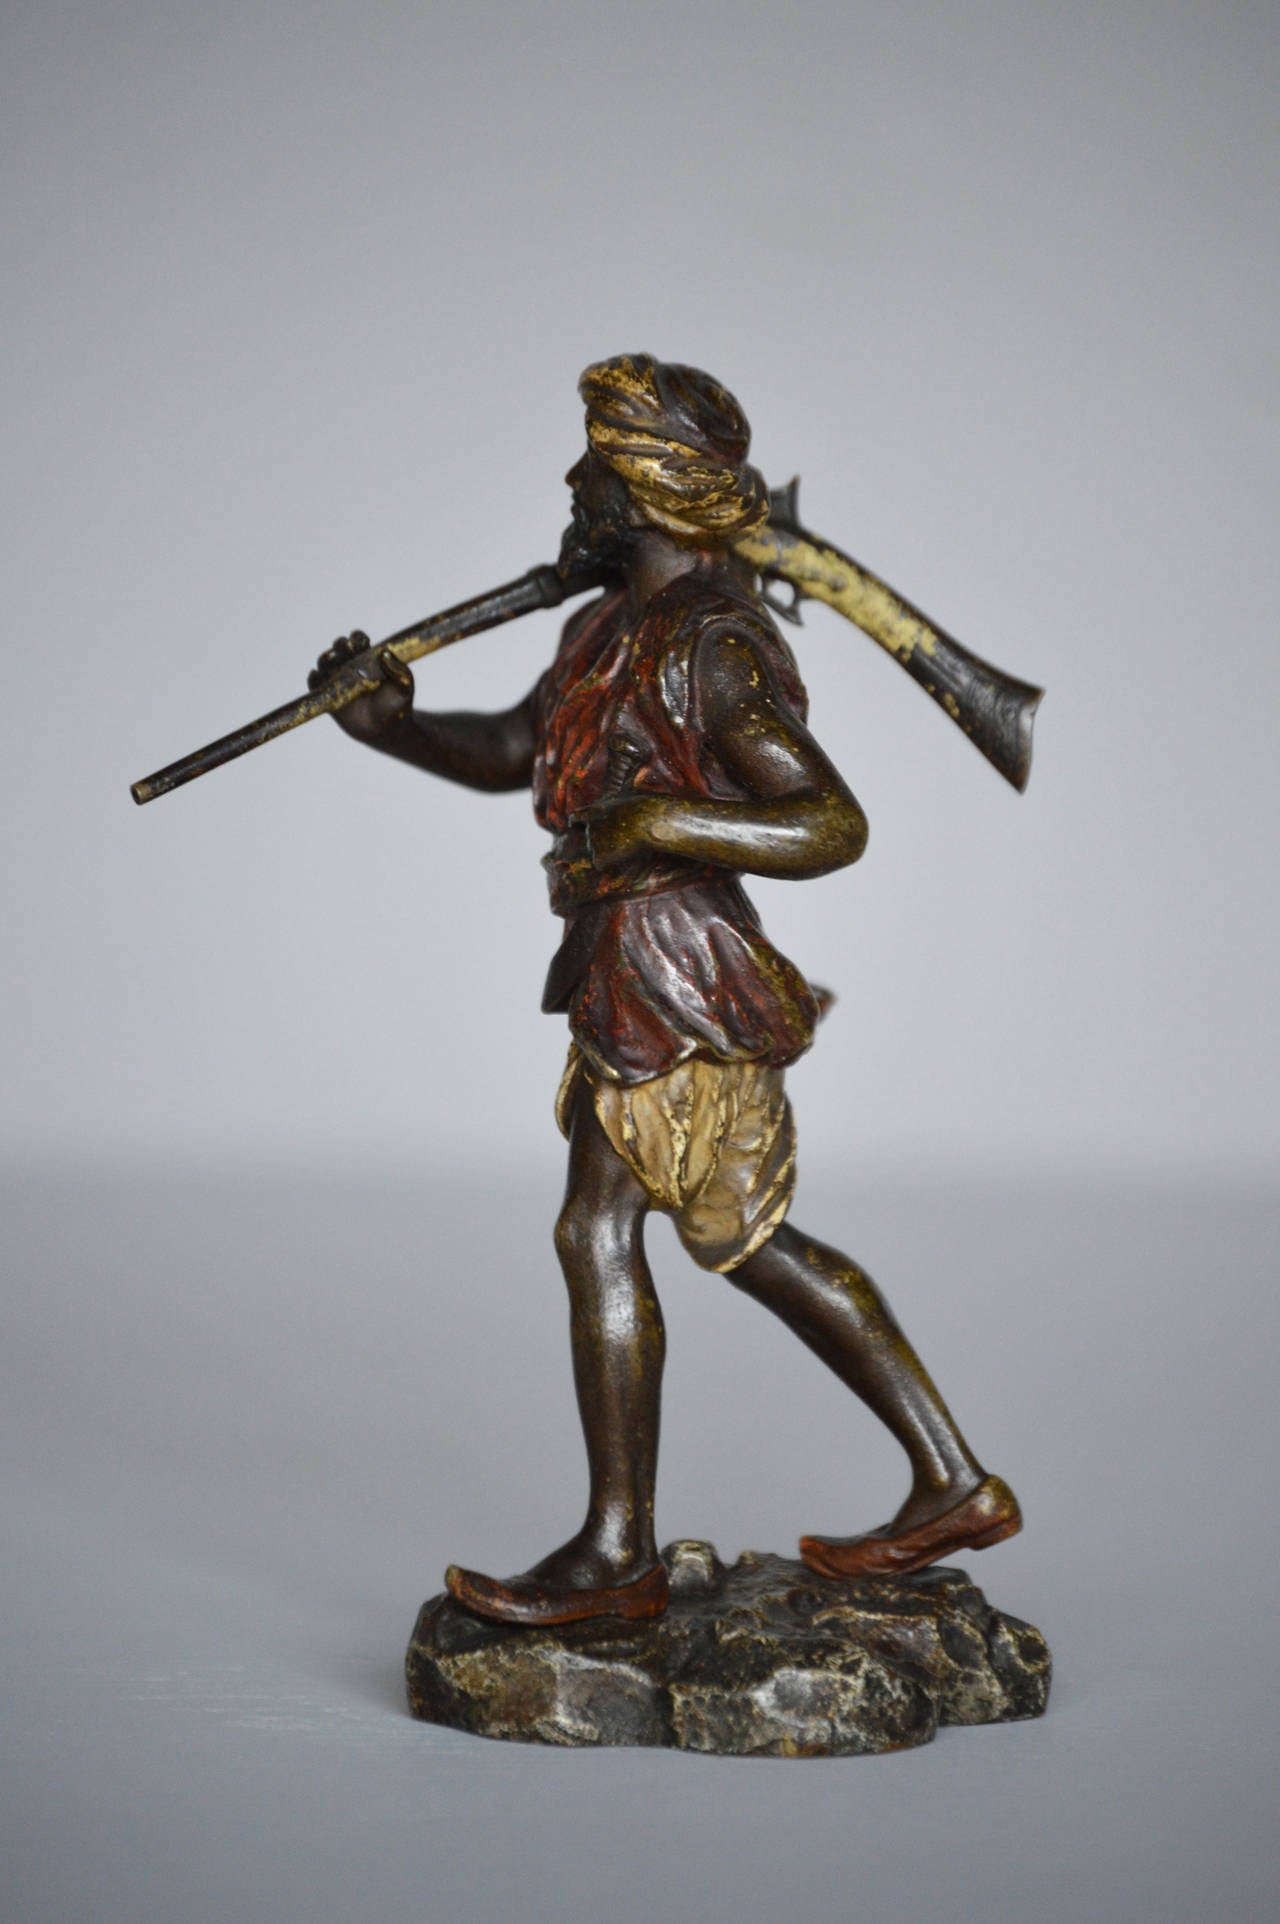 Franz Xavier Bergman
Austrian (1861-1936)
Bronze, signed & stamped
Height: 4¾ inches

An excellent quality late 19th century cold painted bronze sculpture of an Arab warrior with a rifle over his shoulder. The bronze has good hand finished